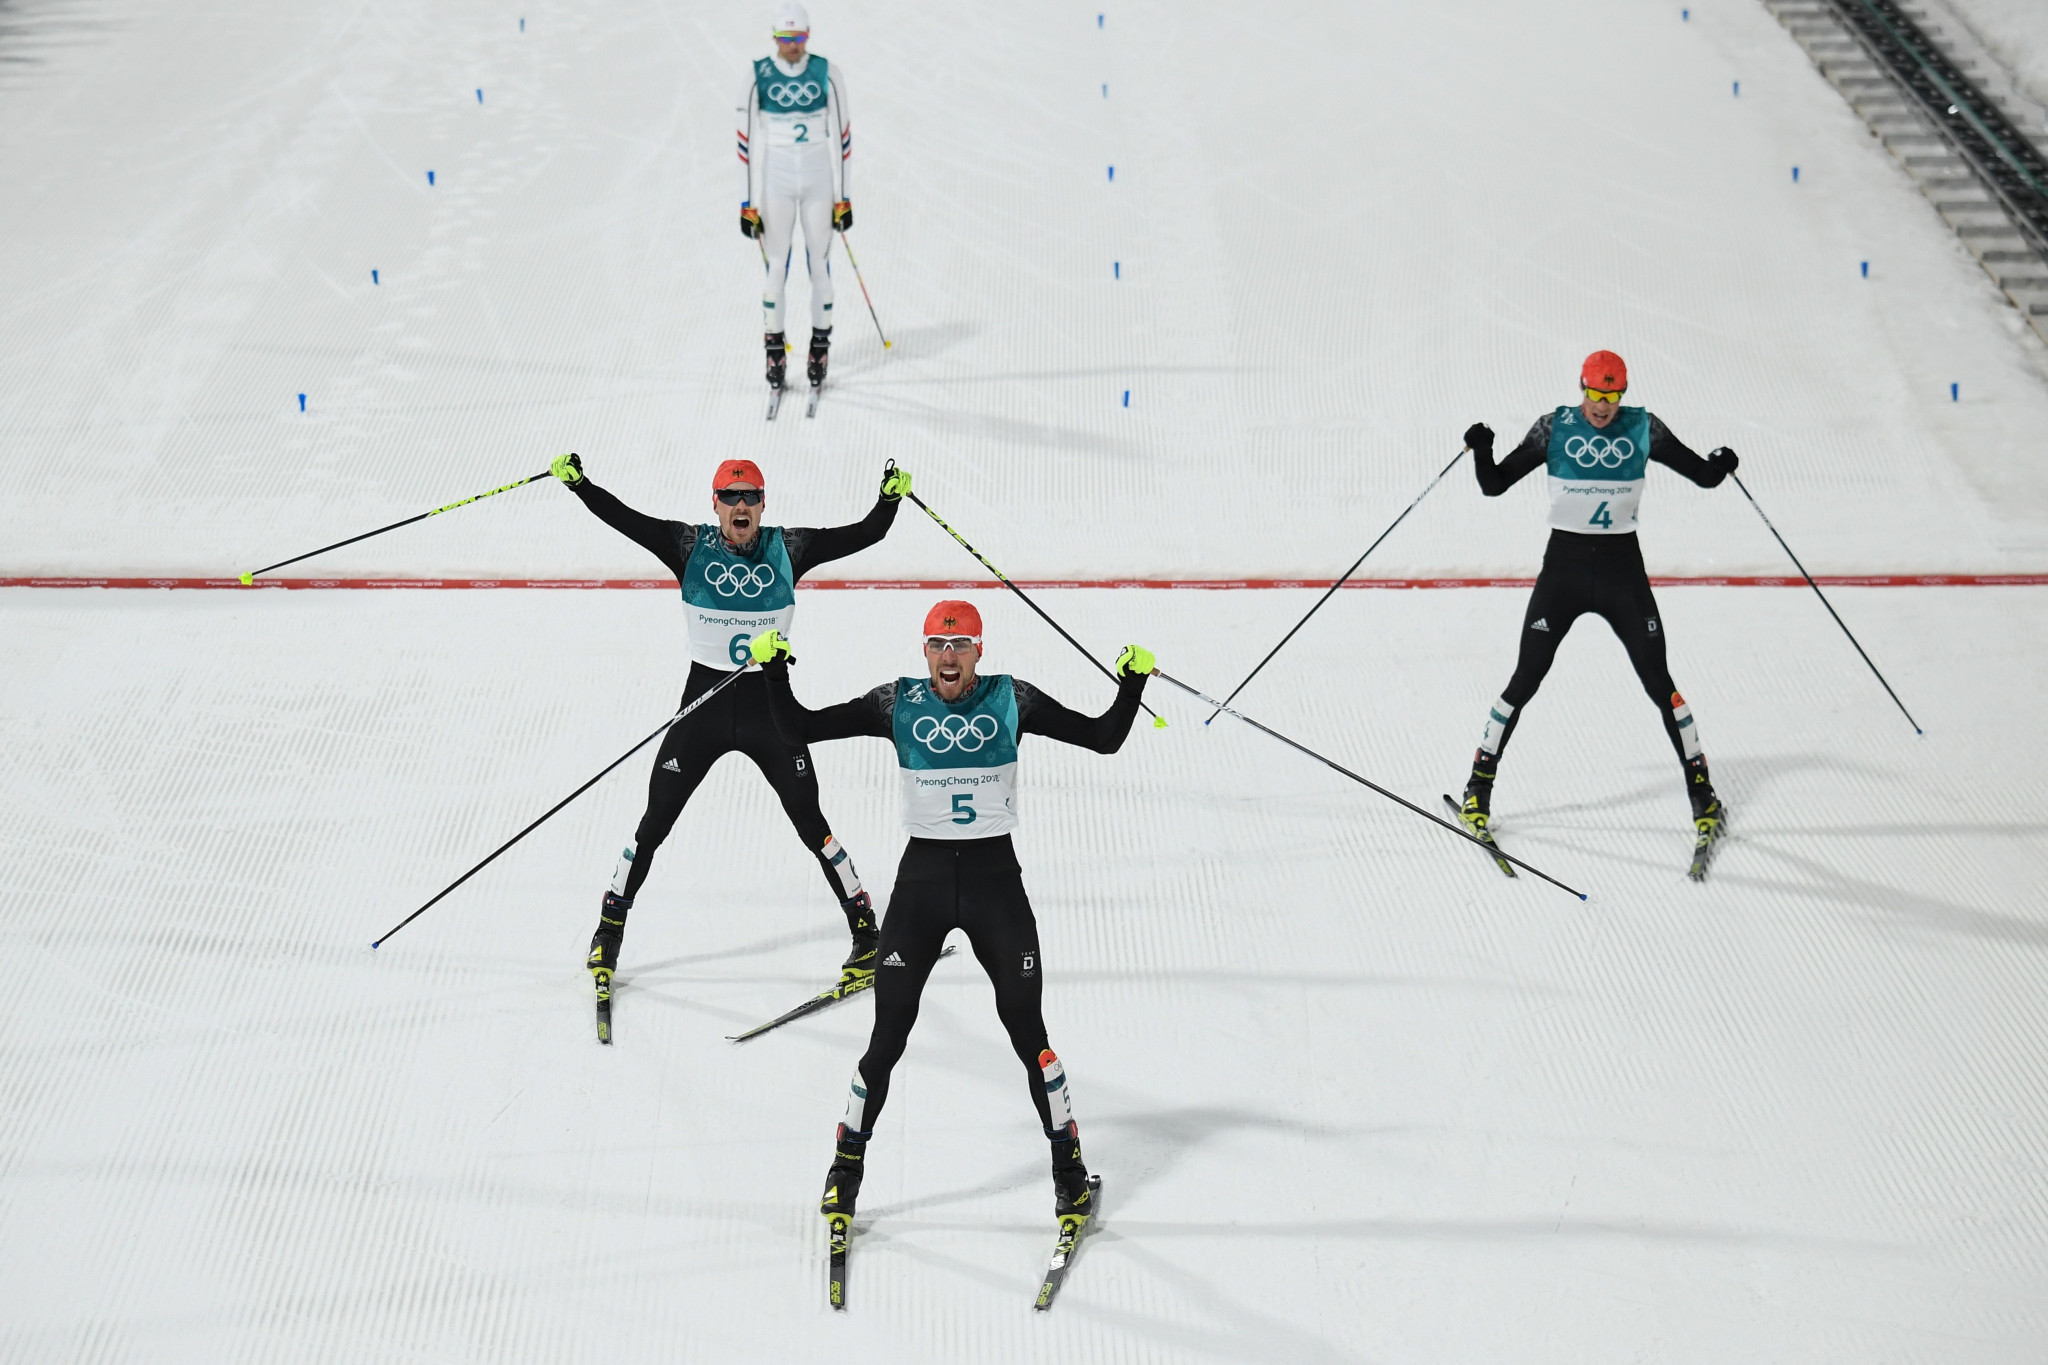 Germany swept the podium in the men's large hill 10km Nordic combined event ©Getty Images